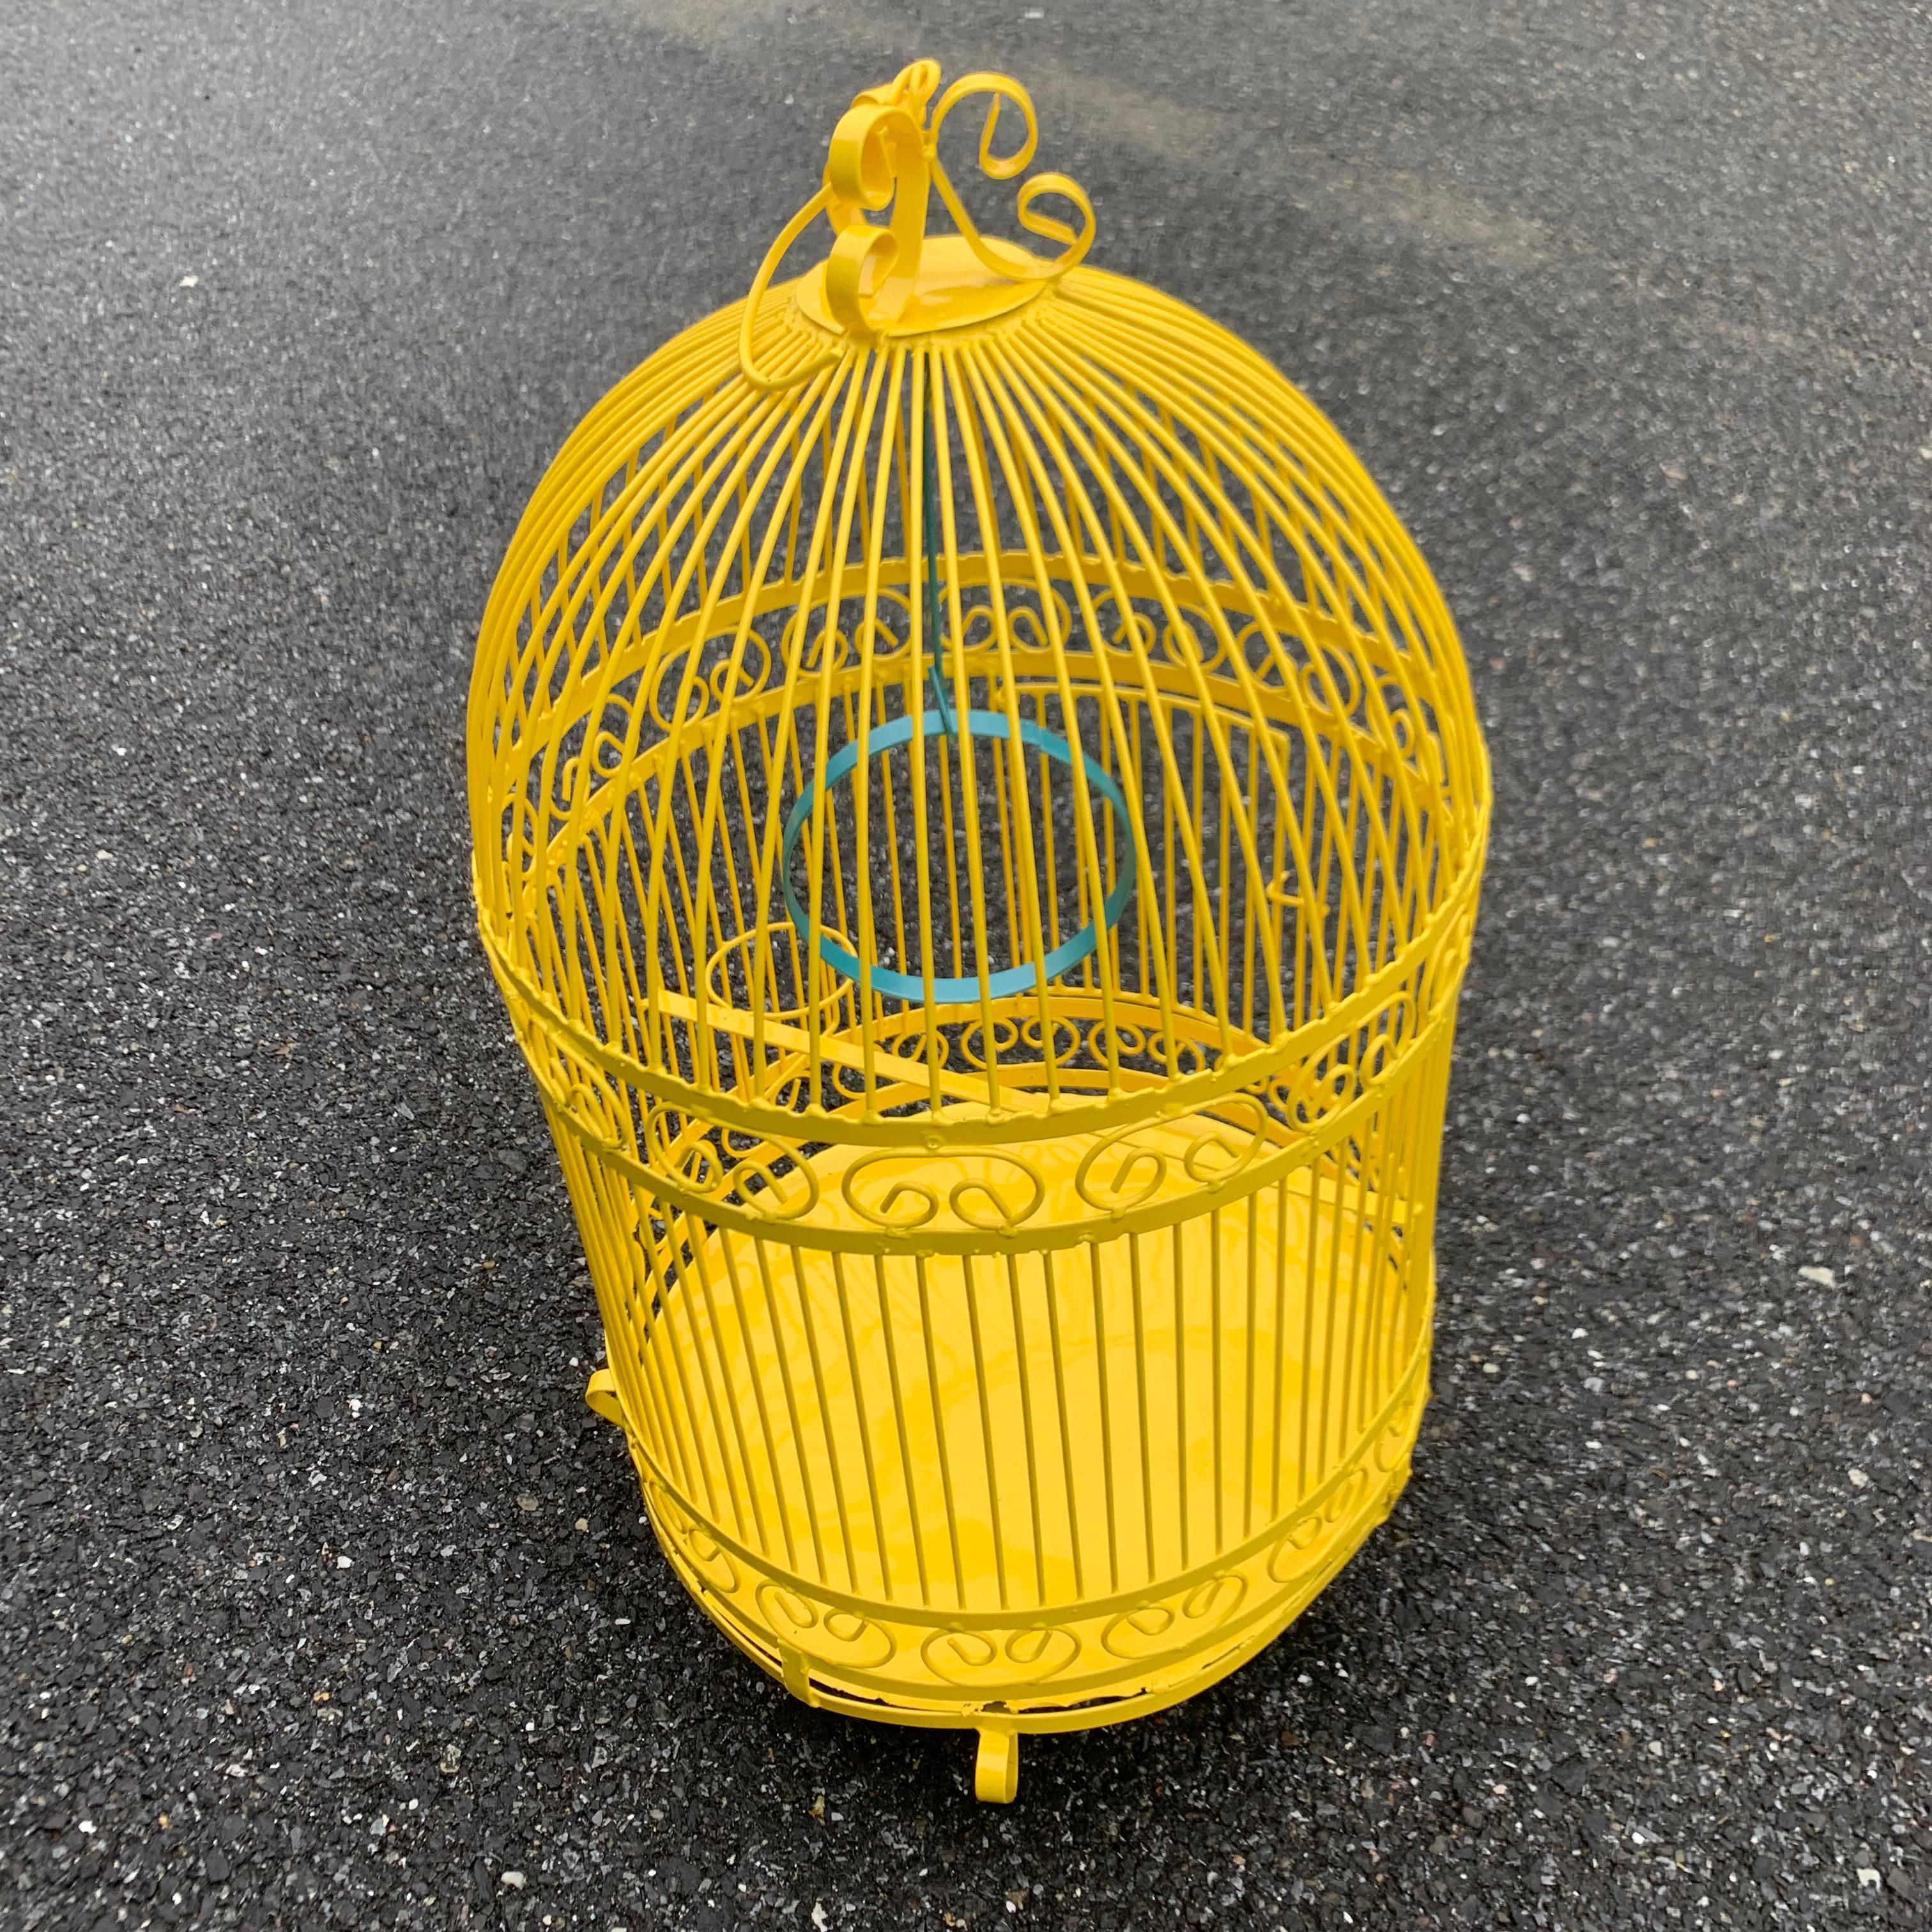 Vintage Metal Birdcage On Stand, Newly Powder-Coated In Bright Sunshine Yellow 4